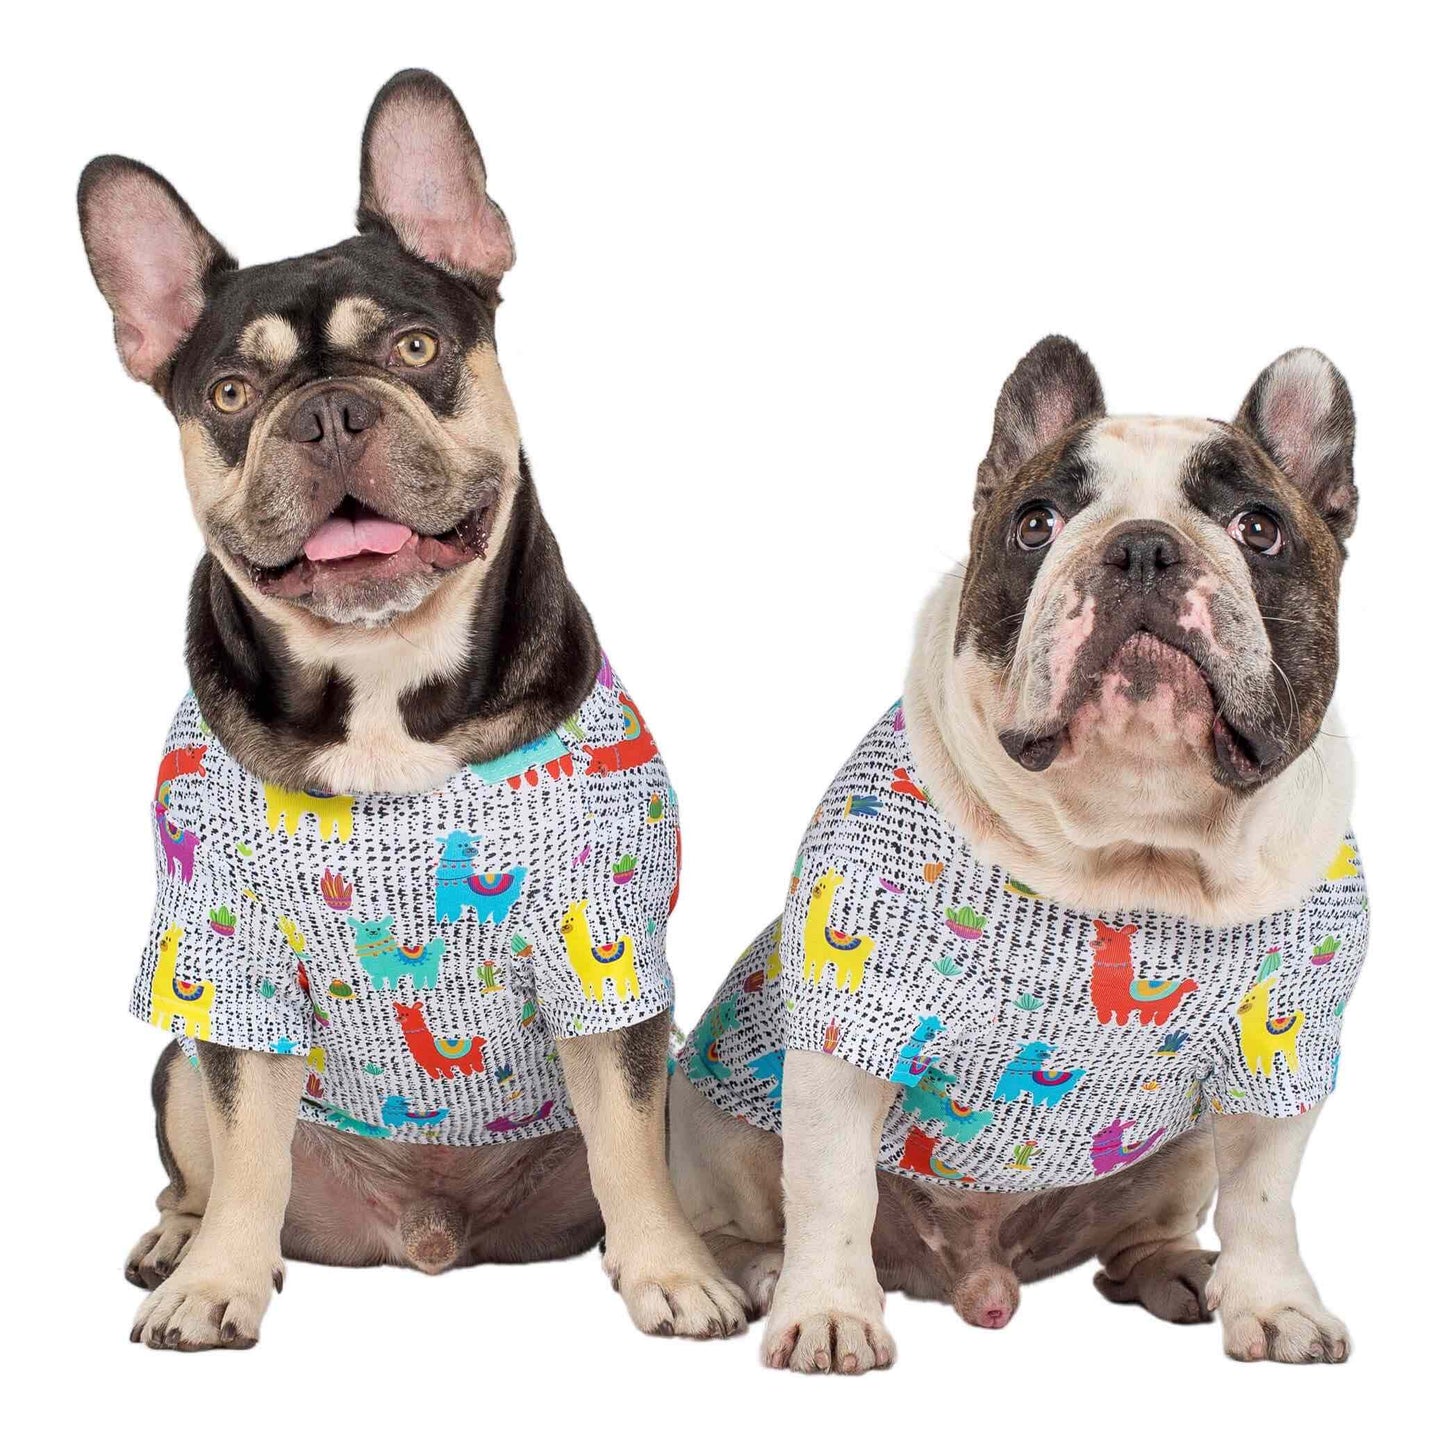 Two French Bulldogs standing front on wearing a shirt for dogs. The shirt is covered in bright coloured llamas printed on the front of it.